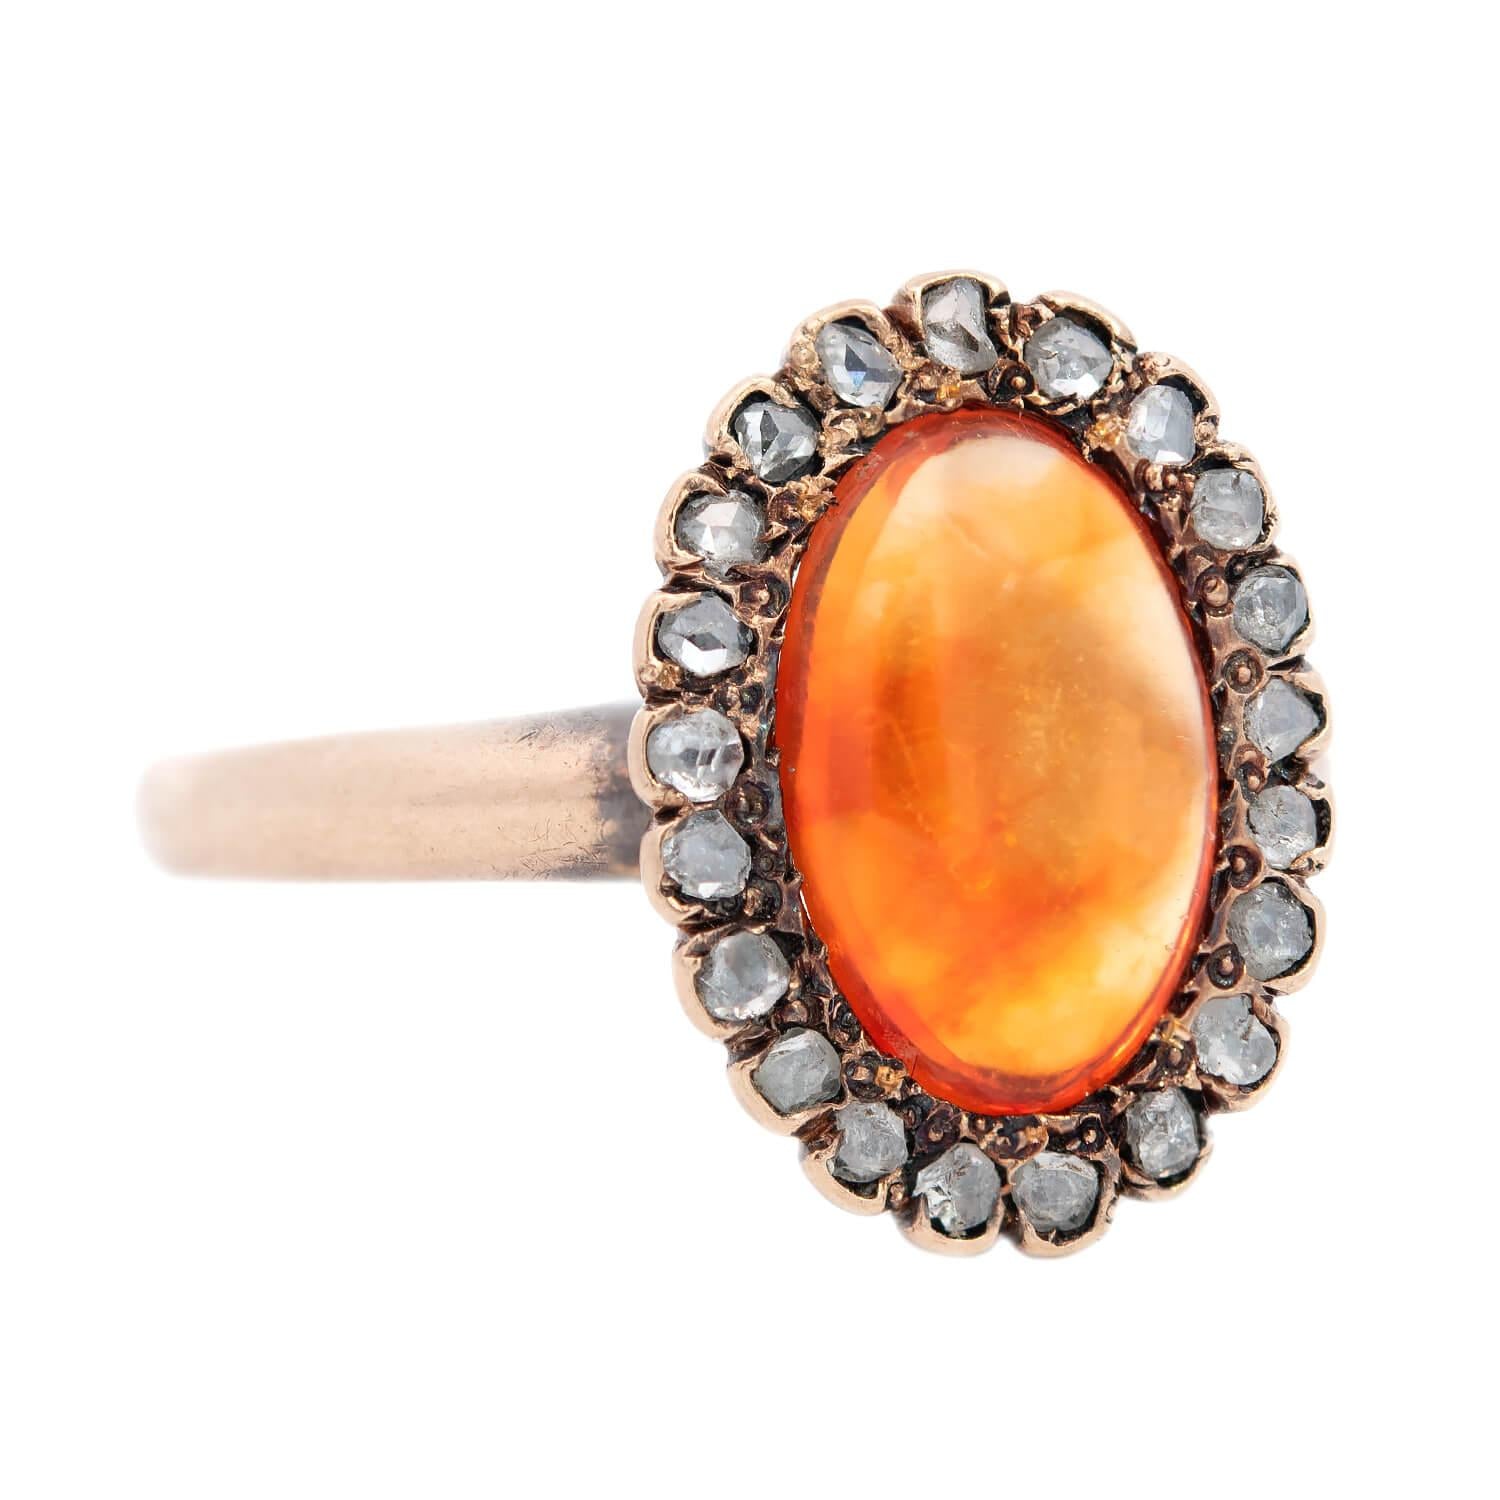 Edwardian 14k Mexican Jelly Opal and Diamond Ring